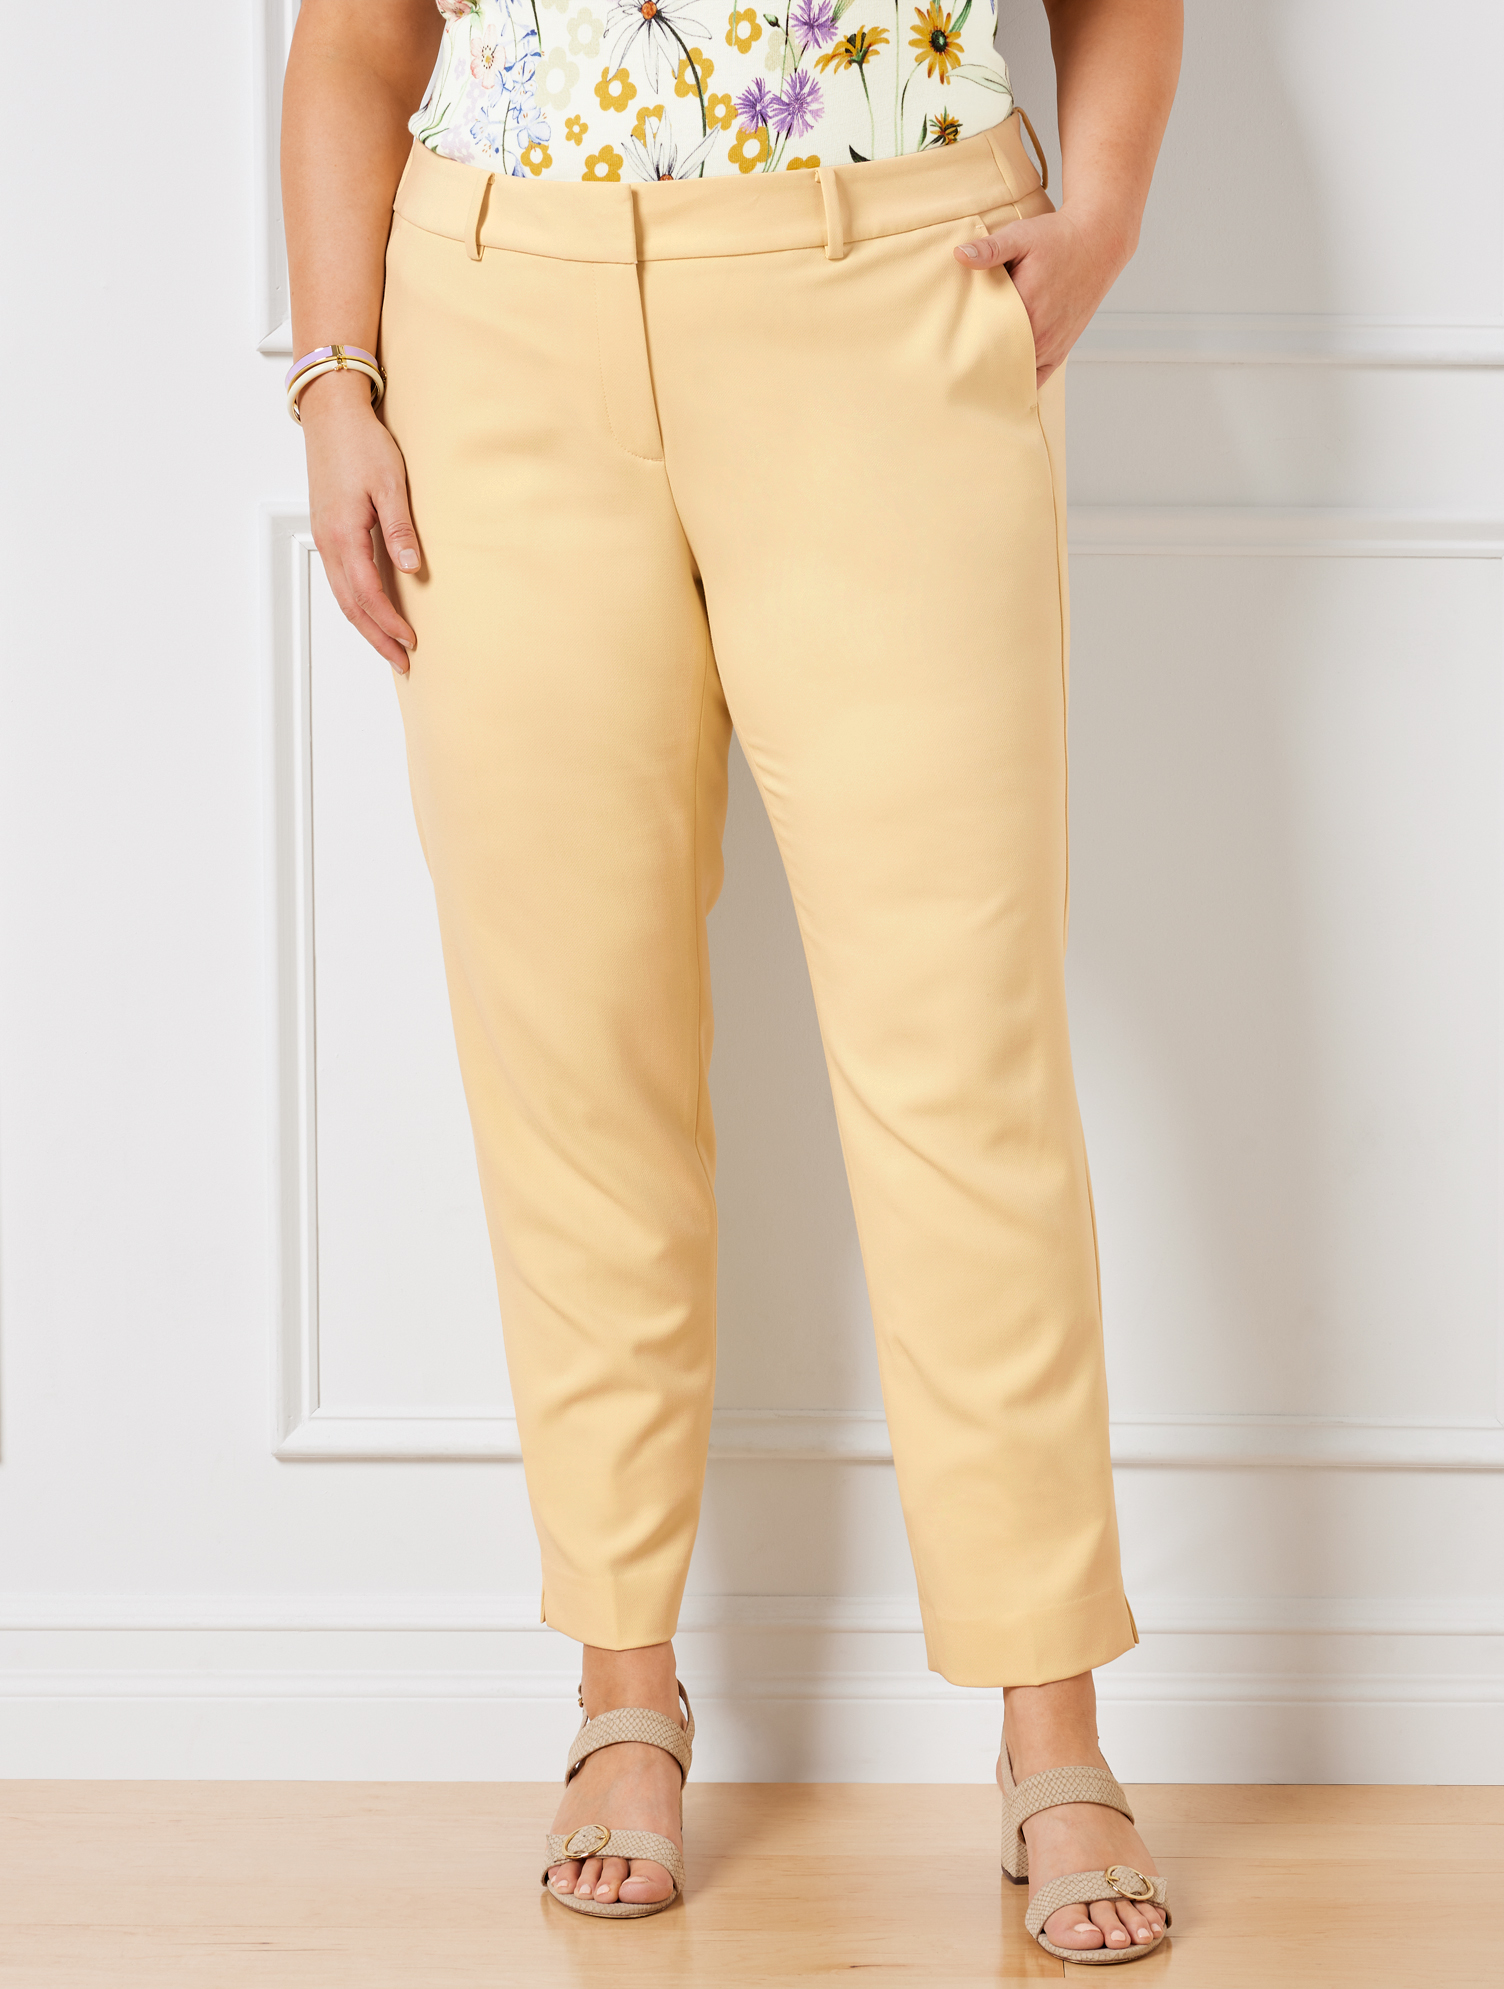 Talbots Hampshire Ankle Pants - Butter Cream - 16